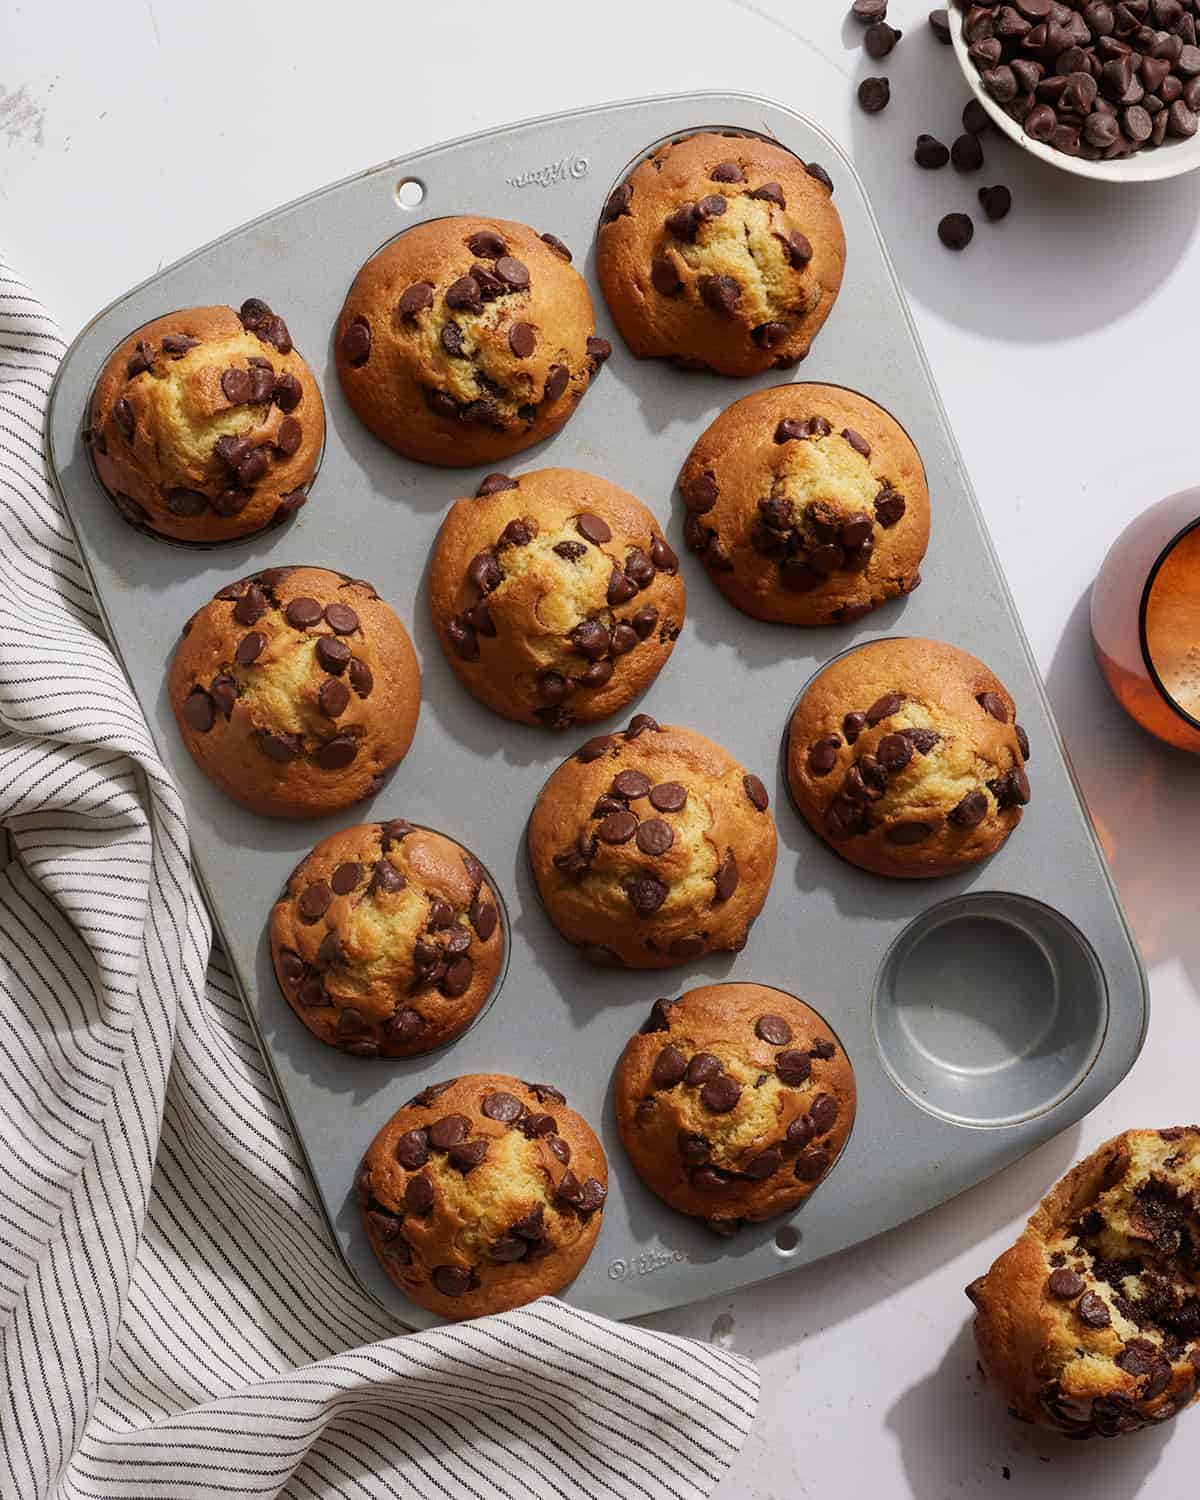 A 3x4 muffin tin with 11 baked muffins. One muffin has been taken out and split in half.  